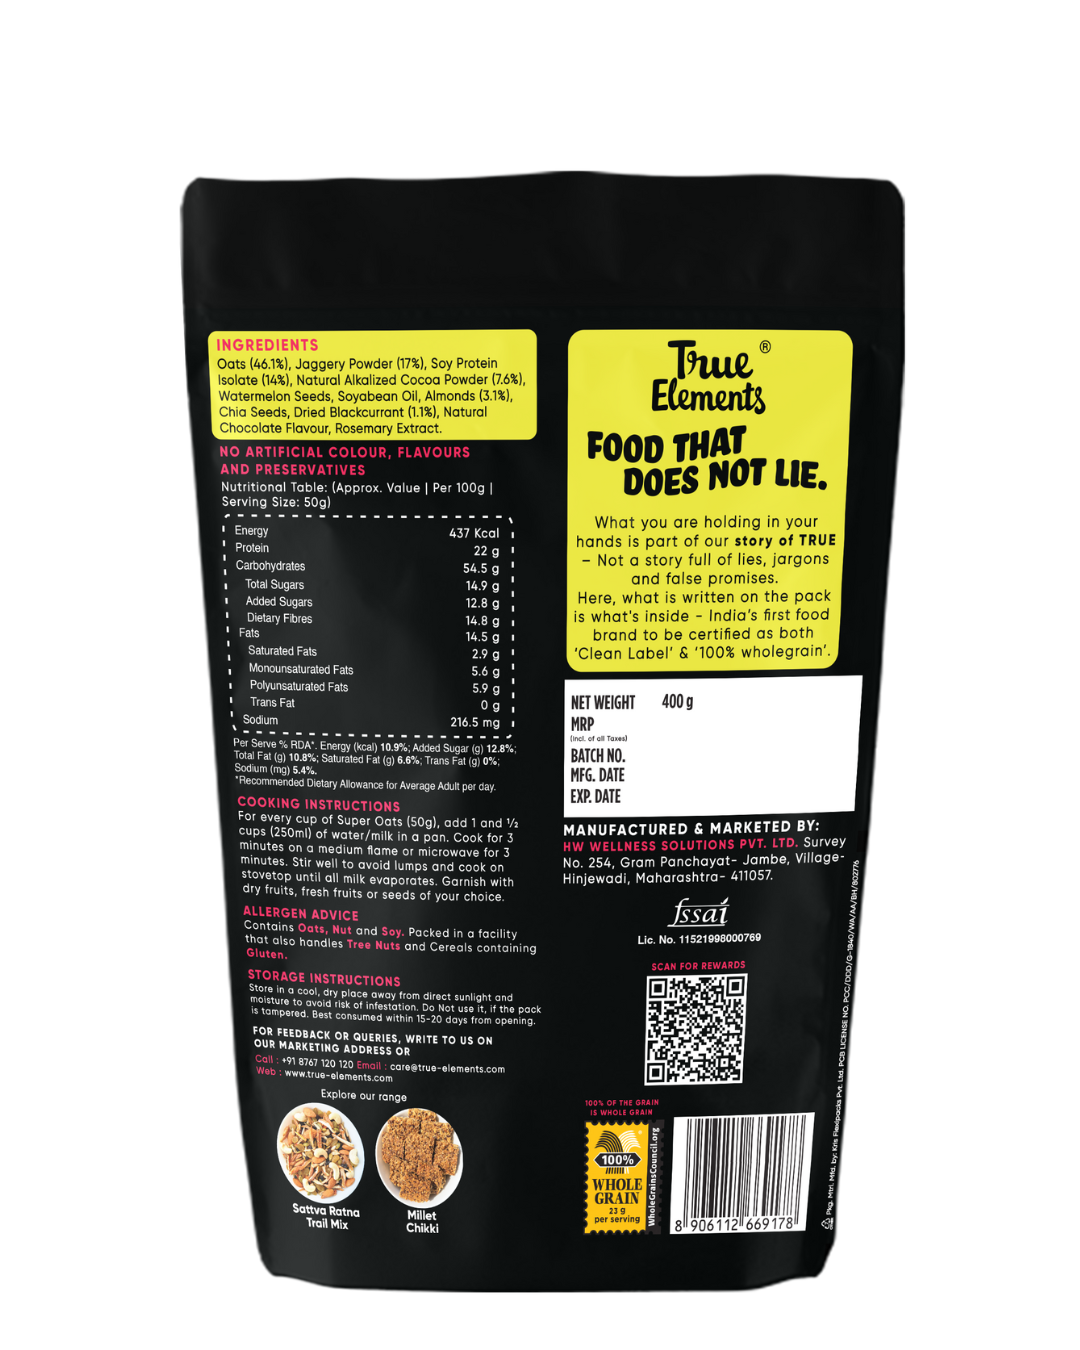 Protein Oats Dark Chocolate - (Contains 21g Protein)